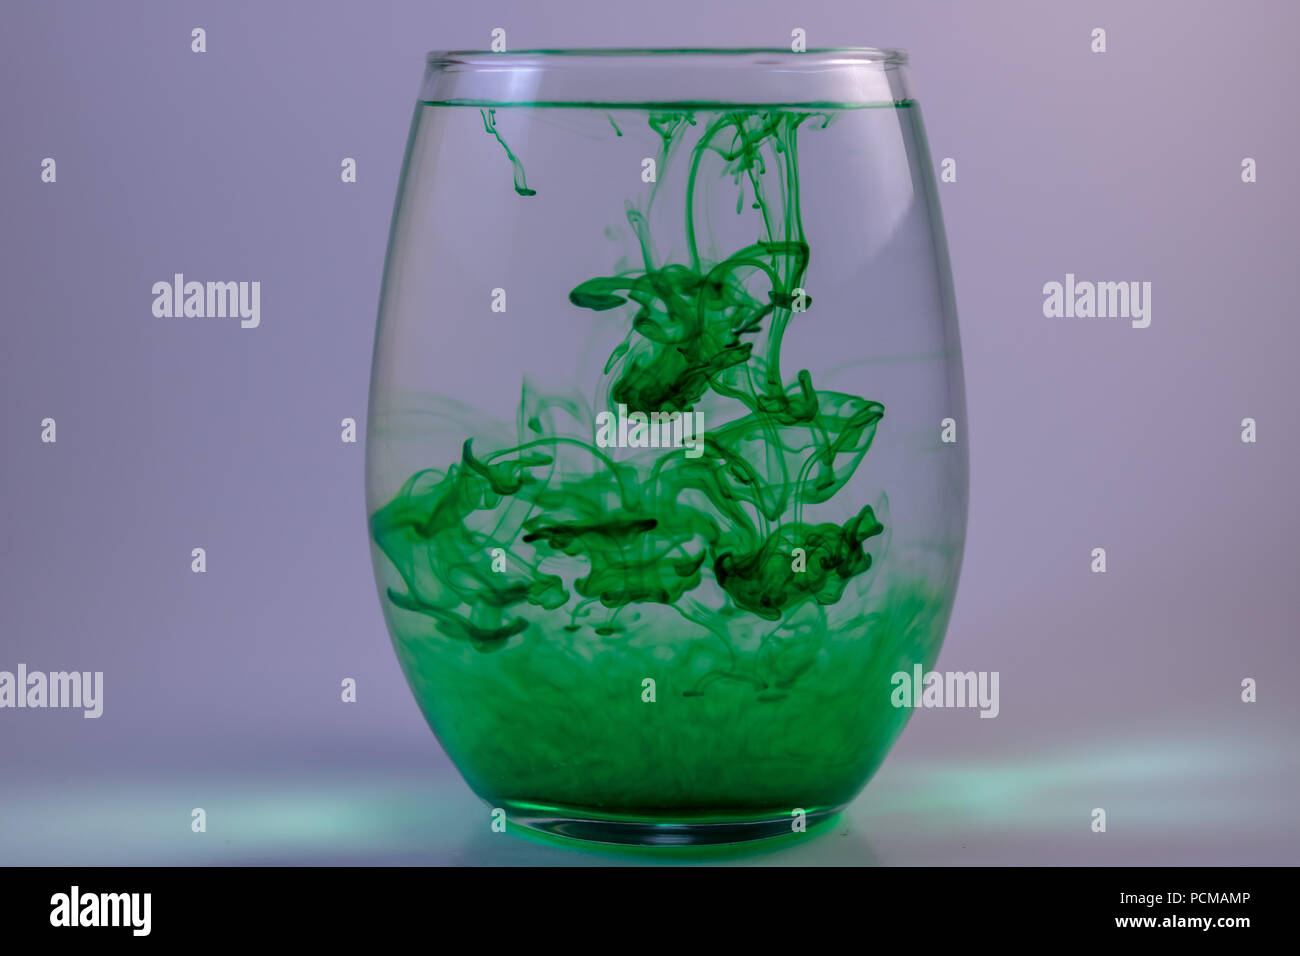 Swirls of food coloring in a glass of water. Stock Photo